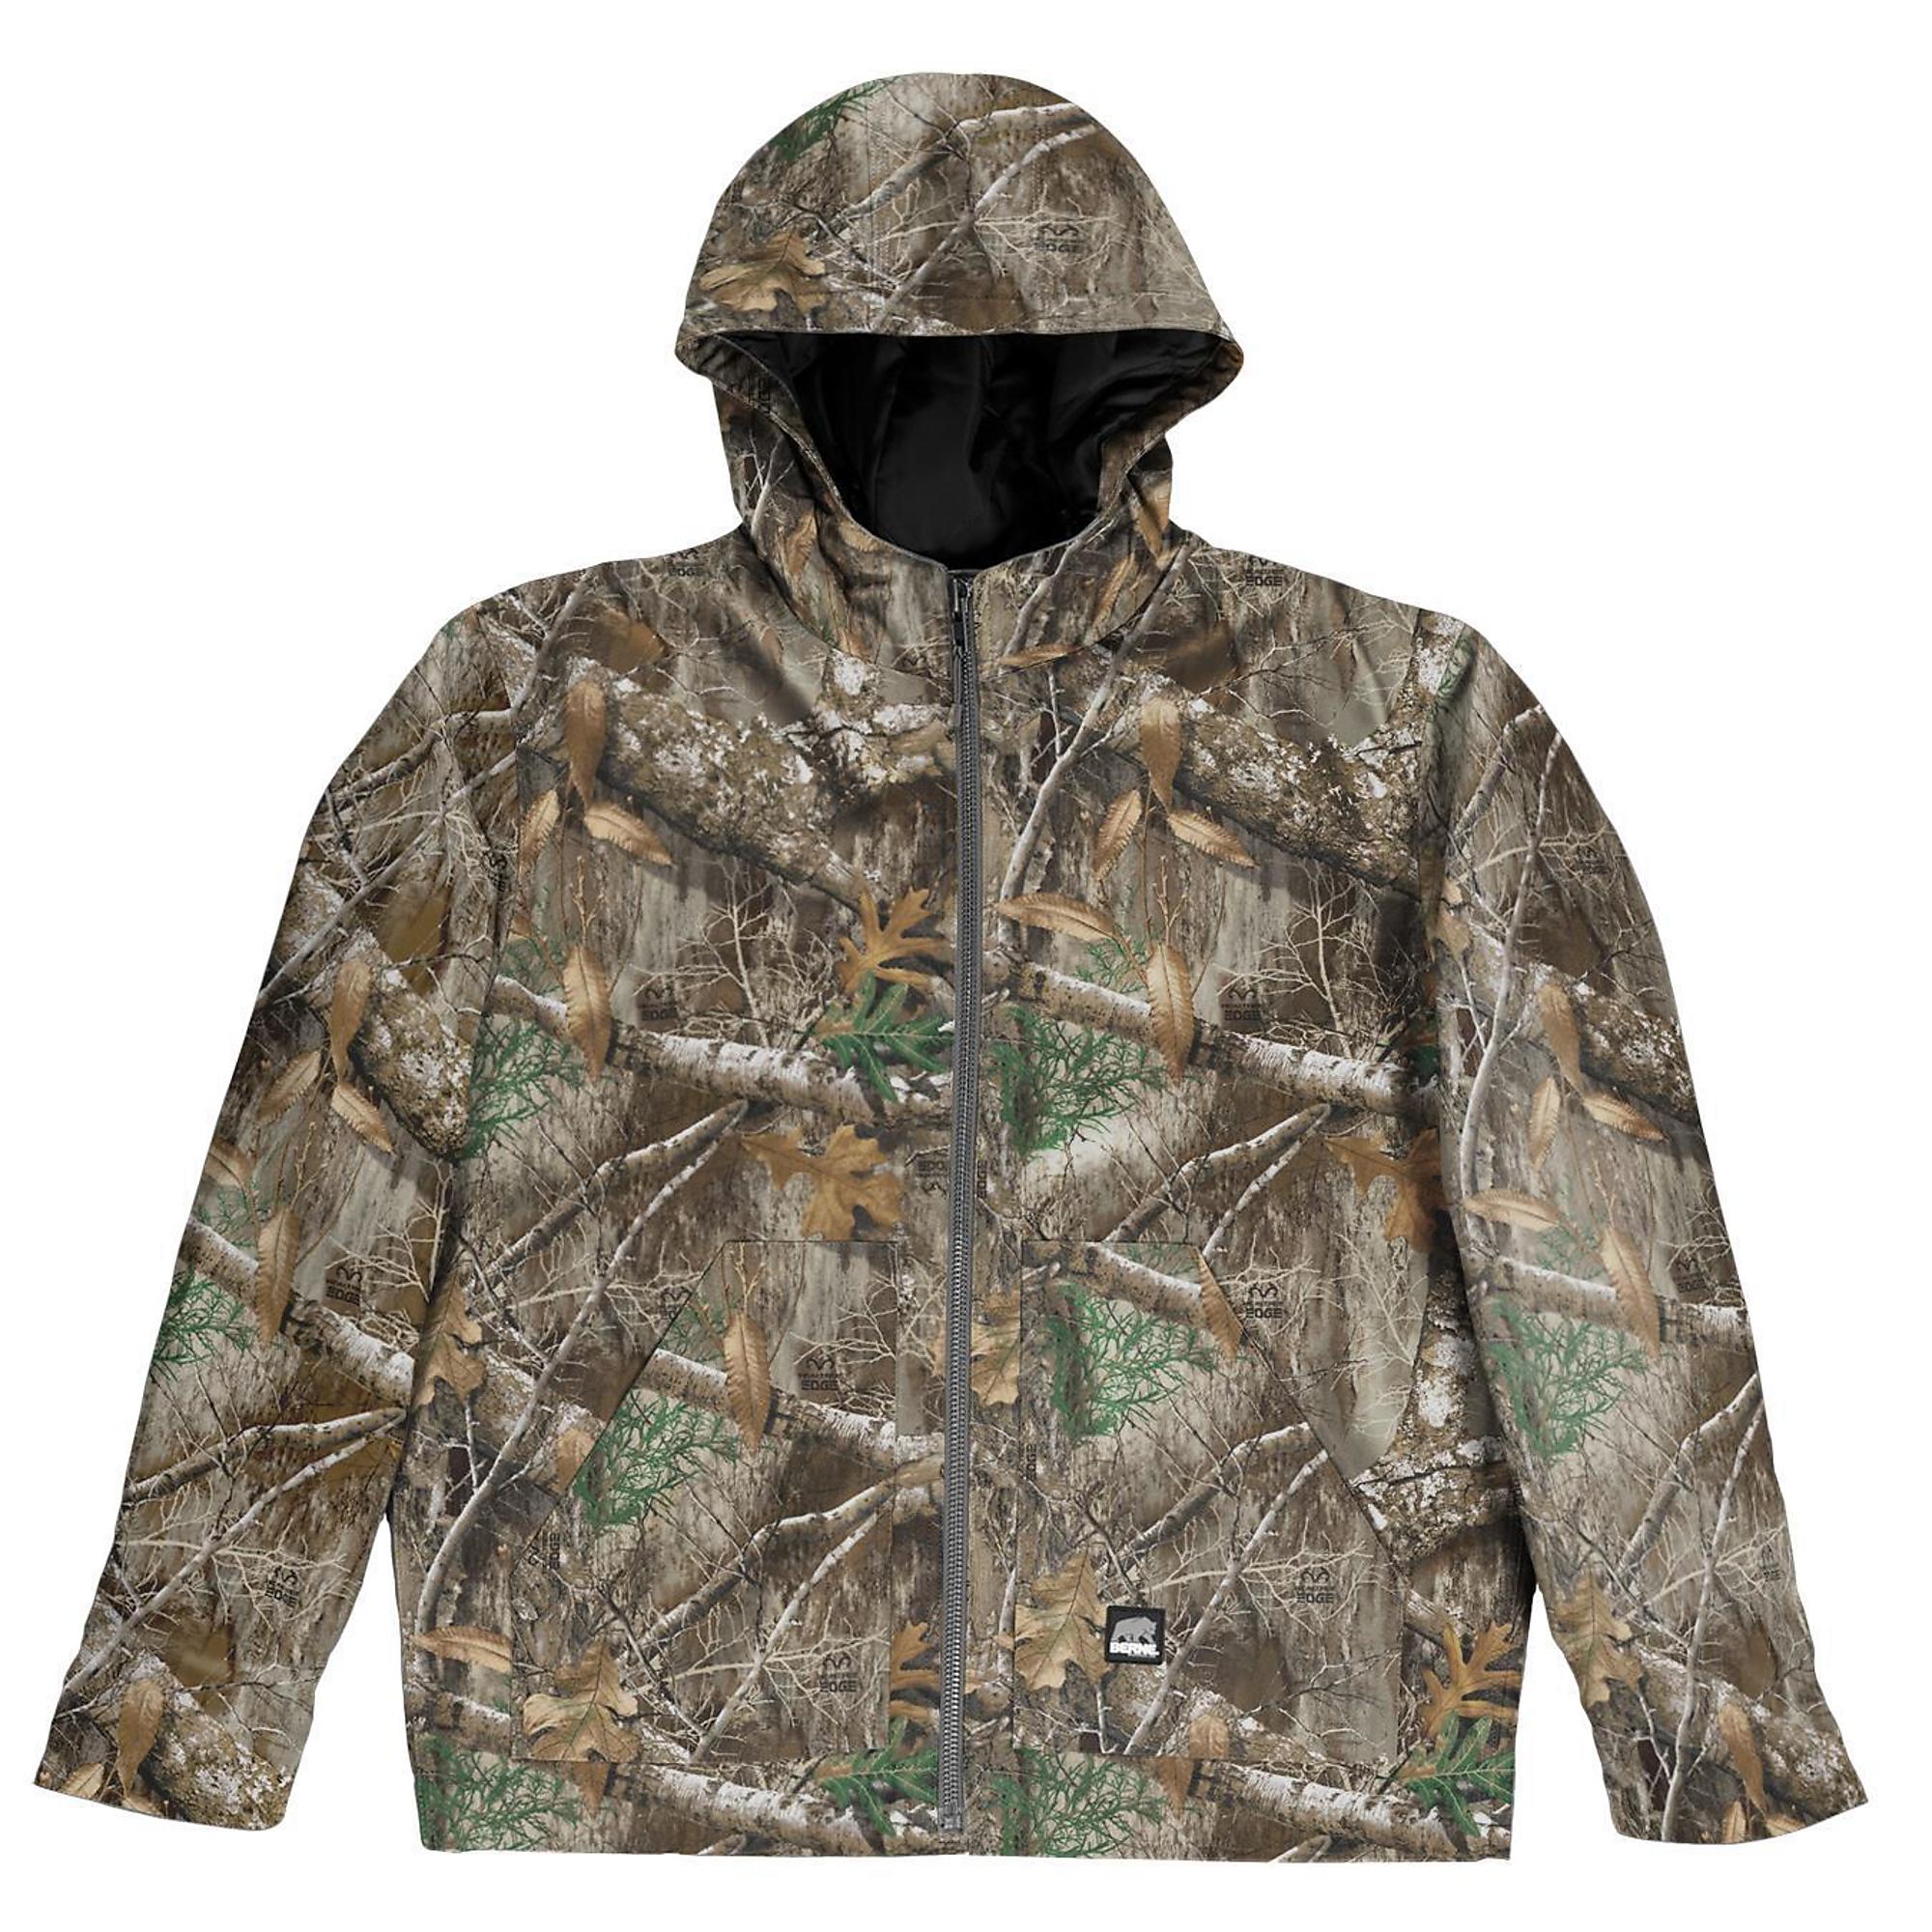 Berne Men's Realtree Edge Camouflage Insulated Hooded Jacket at